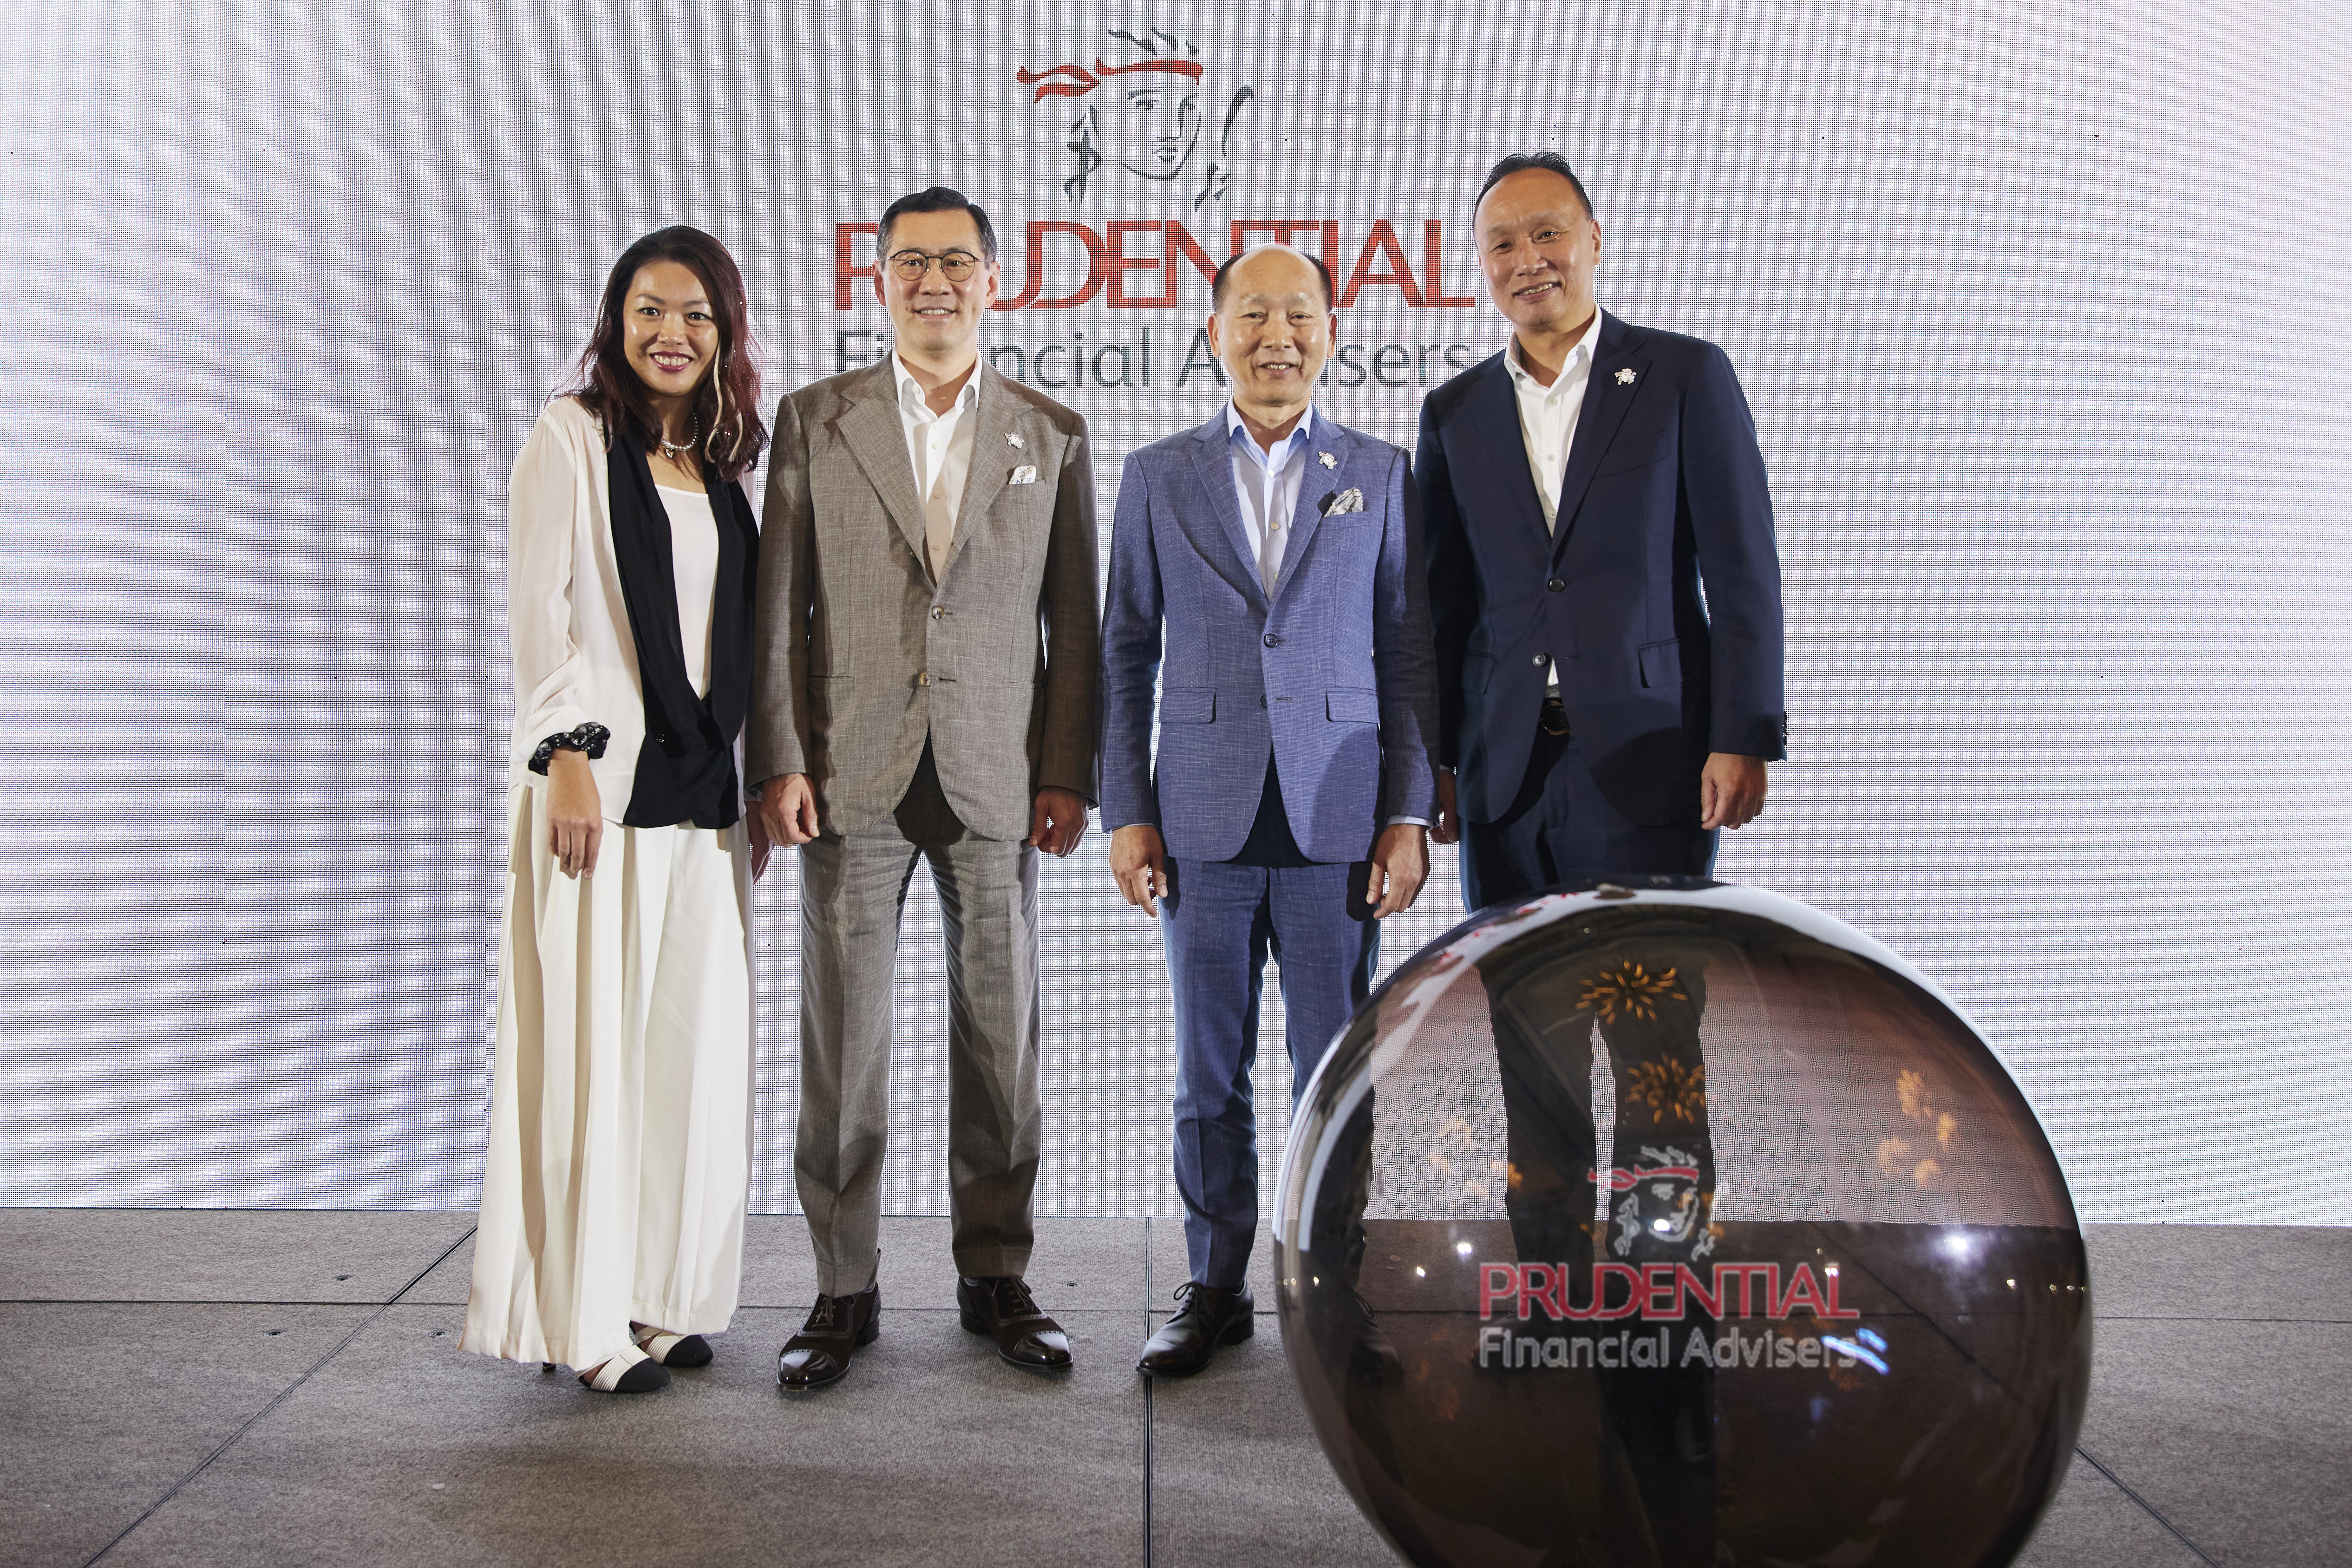 Dennis Tan, CEO of Prudential Singapore (2nd from left), Bernard Chai, CEO of Prudential Financial Advisers (2nd from right), Ben Tan, Chief Distribution Officer & Chief Corporate Development Officer, Prudential Singapore (1st from right), and Jackie Chew, Chief Risk Officer, Prudential Singapore (1st from left), celebrating the official launch of Prudential Financial Advisers.